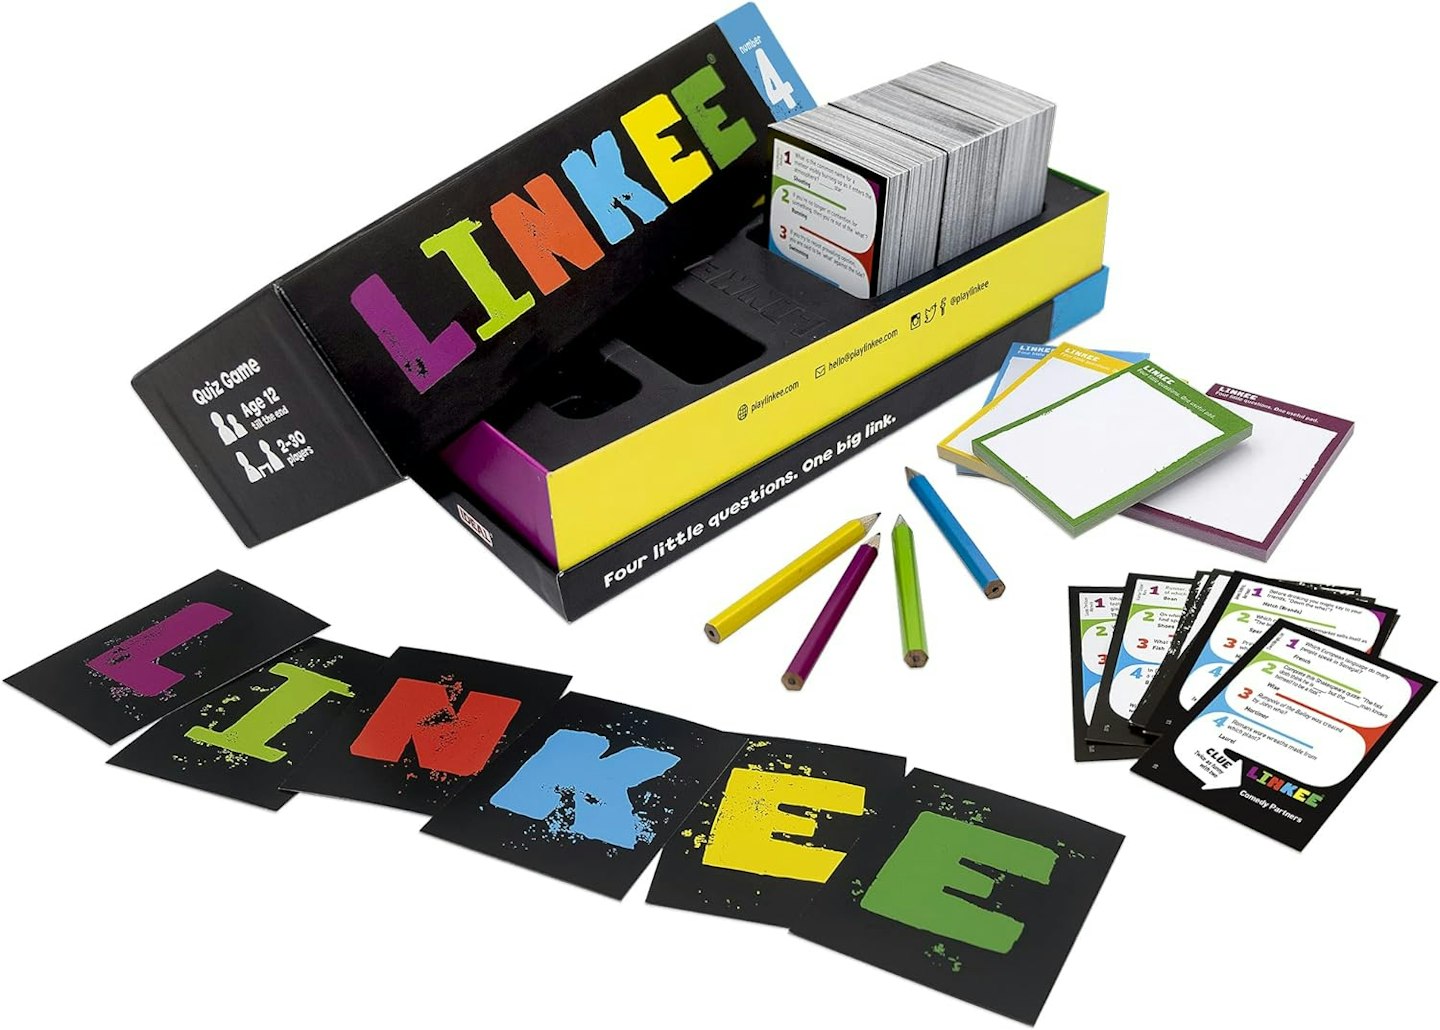 Linkee game box and contents 